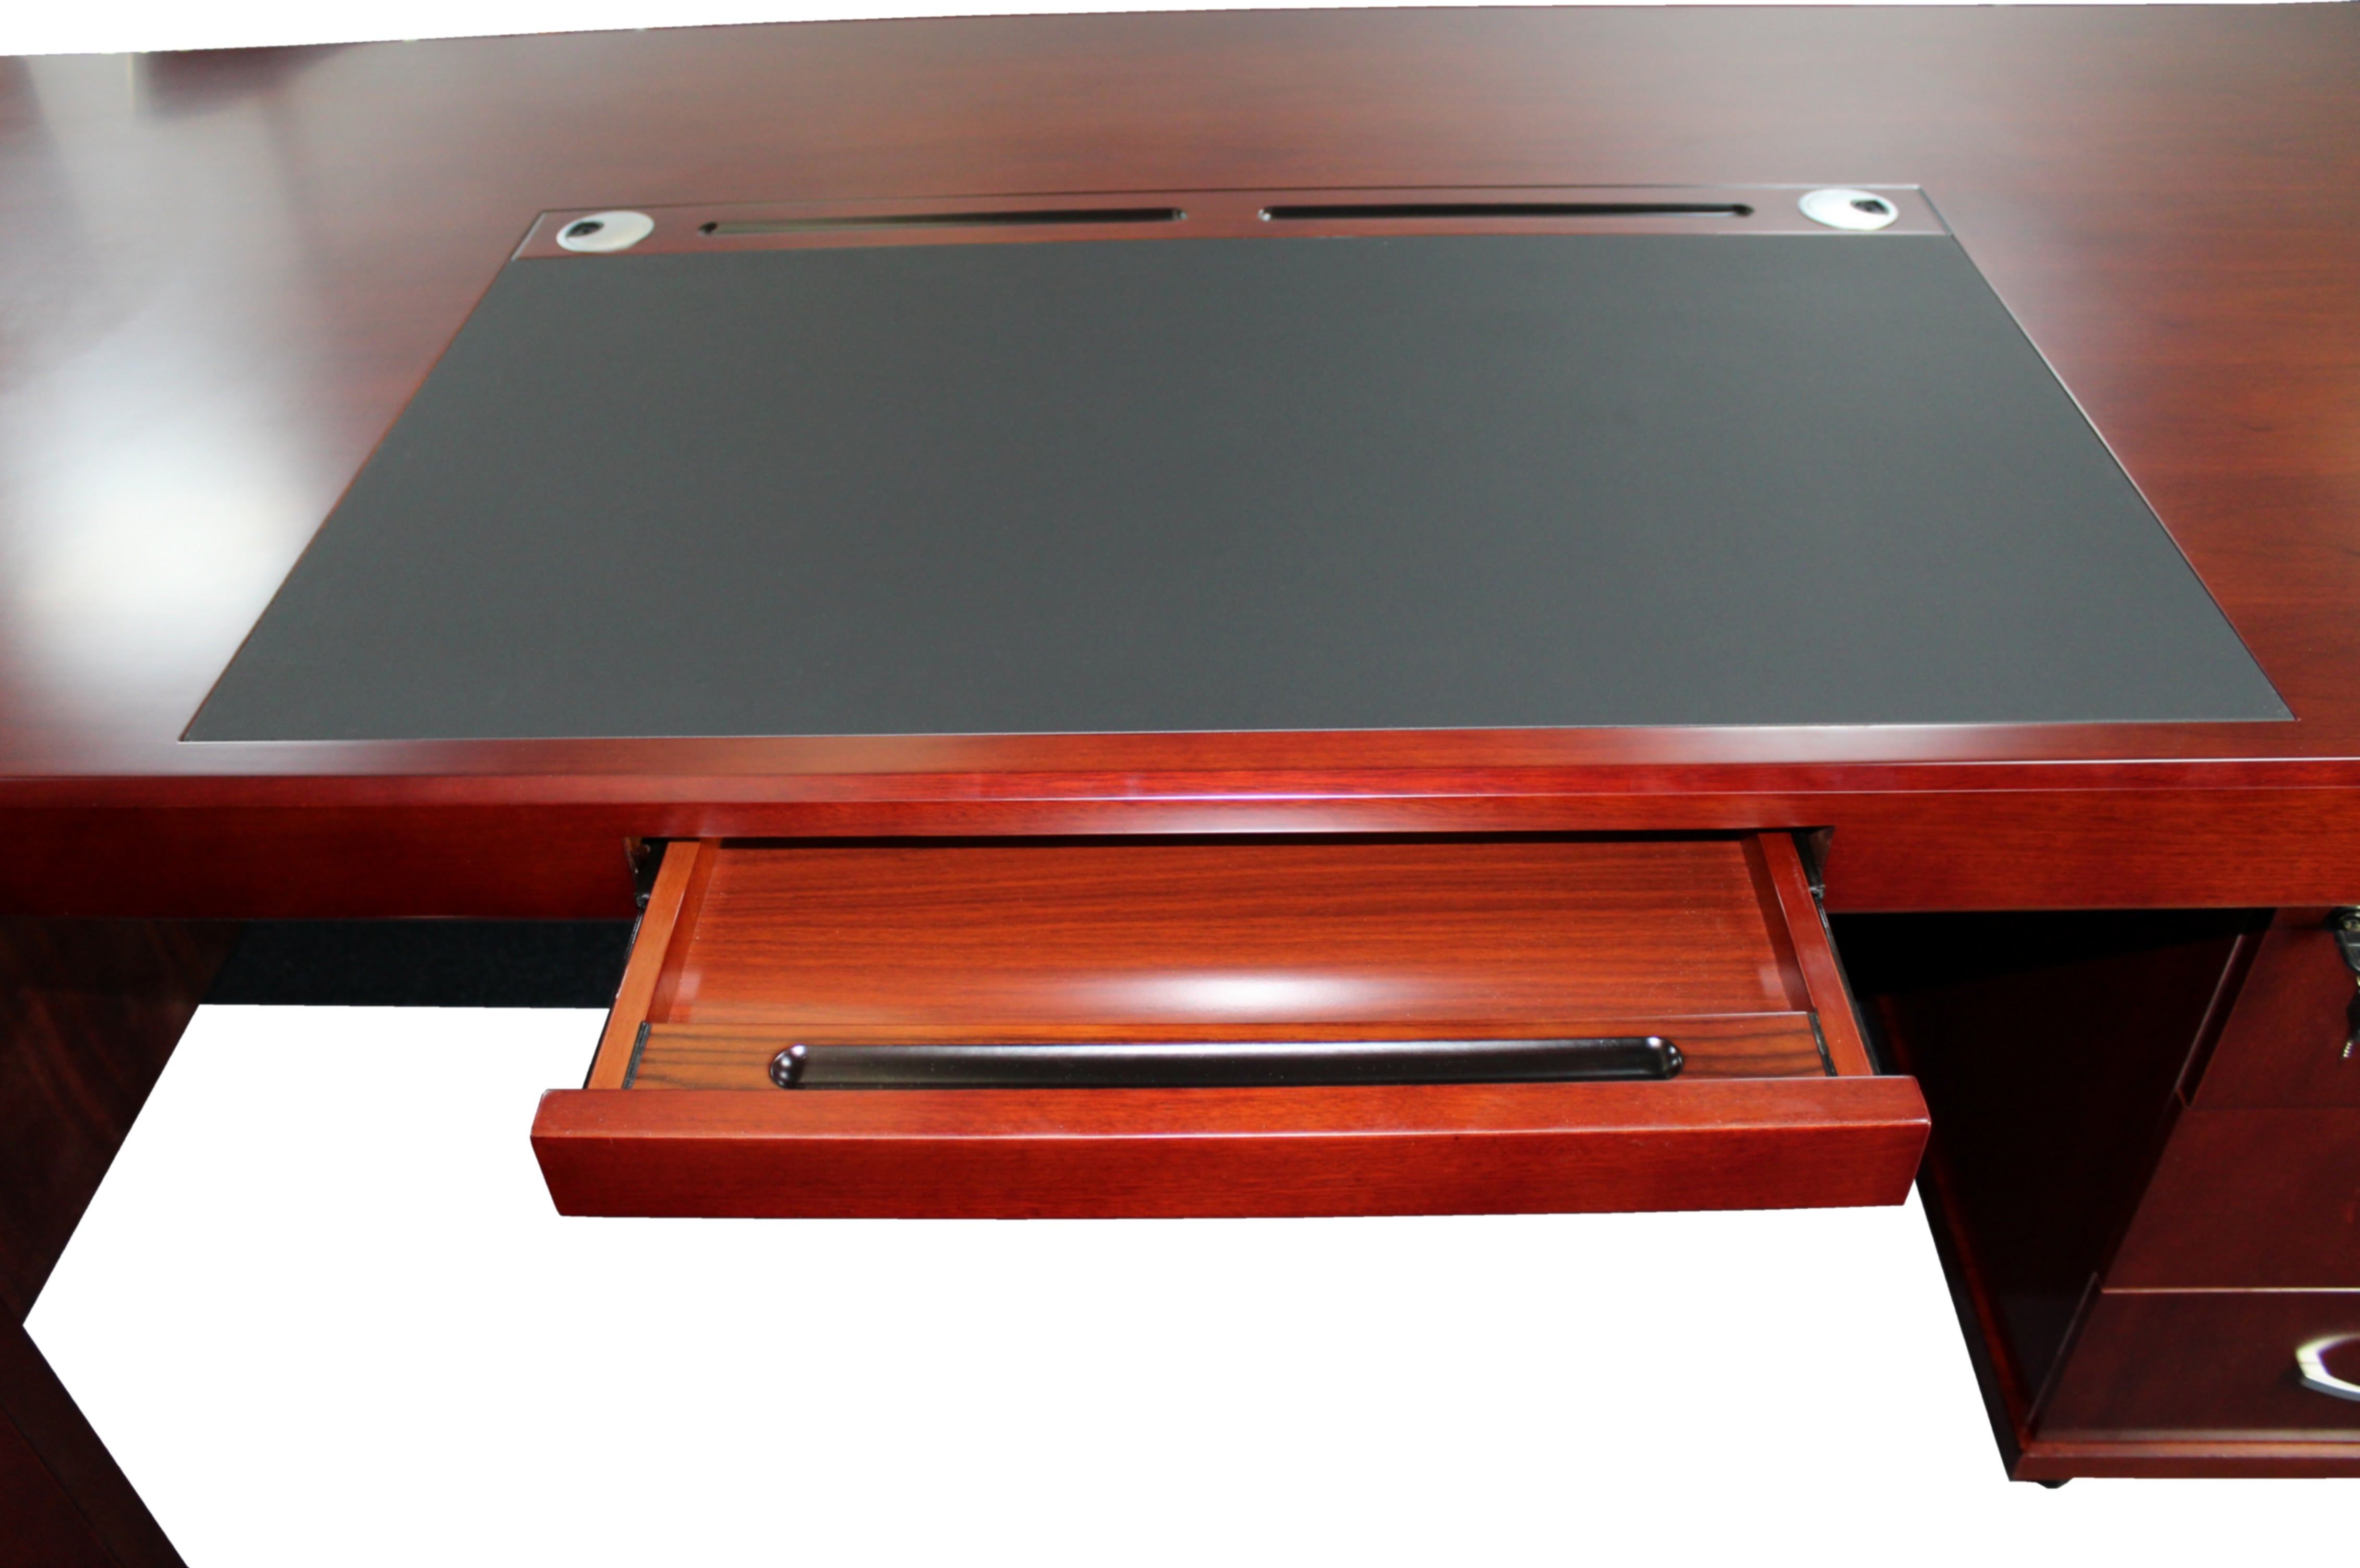 Executive Corner Desk Mahogany Real Wood and Leather - 2400mm - HB274M